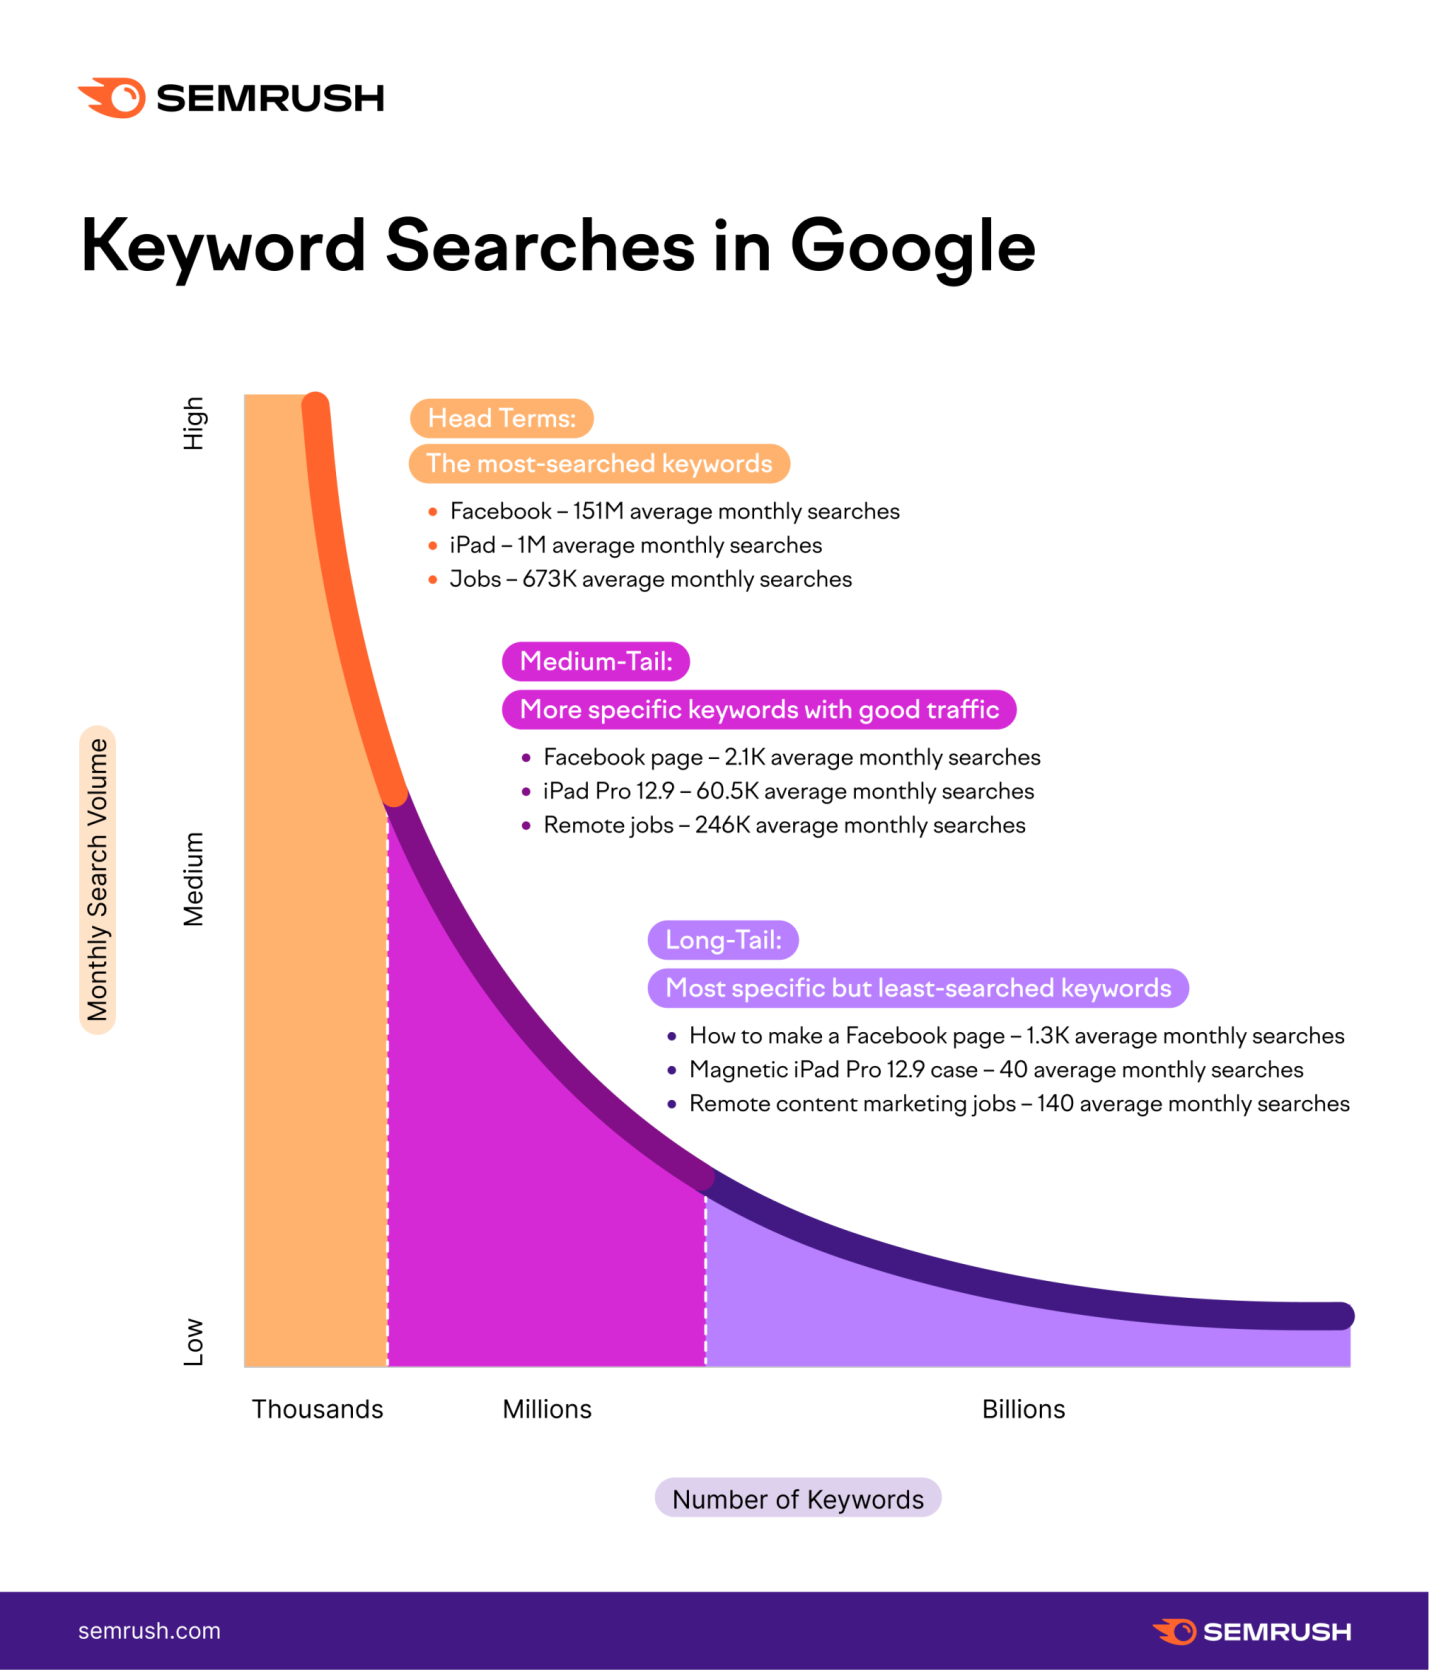 Picture showing the search demand curve with head terms, medium-tail and long-tail keywords